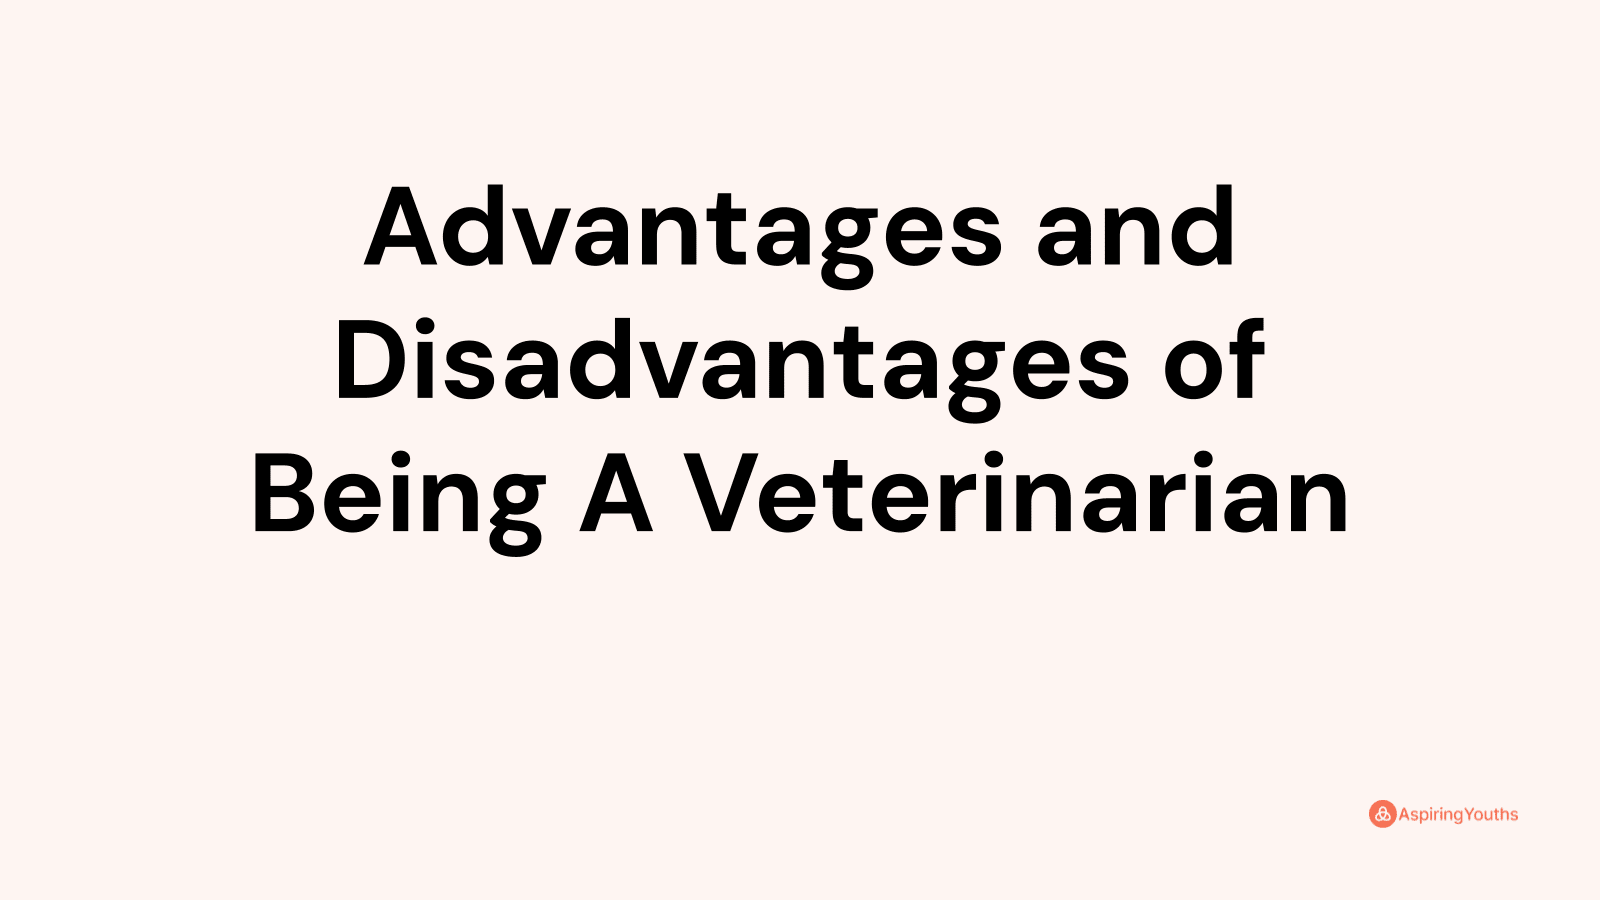 Advantages and disadvantages of Being A Veterinarian